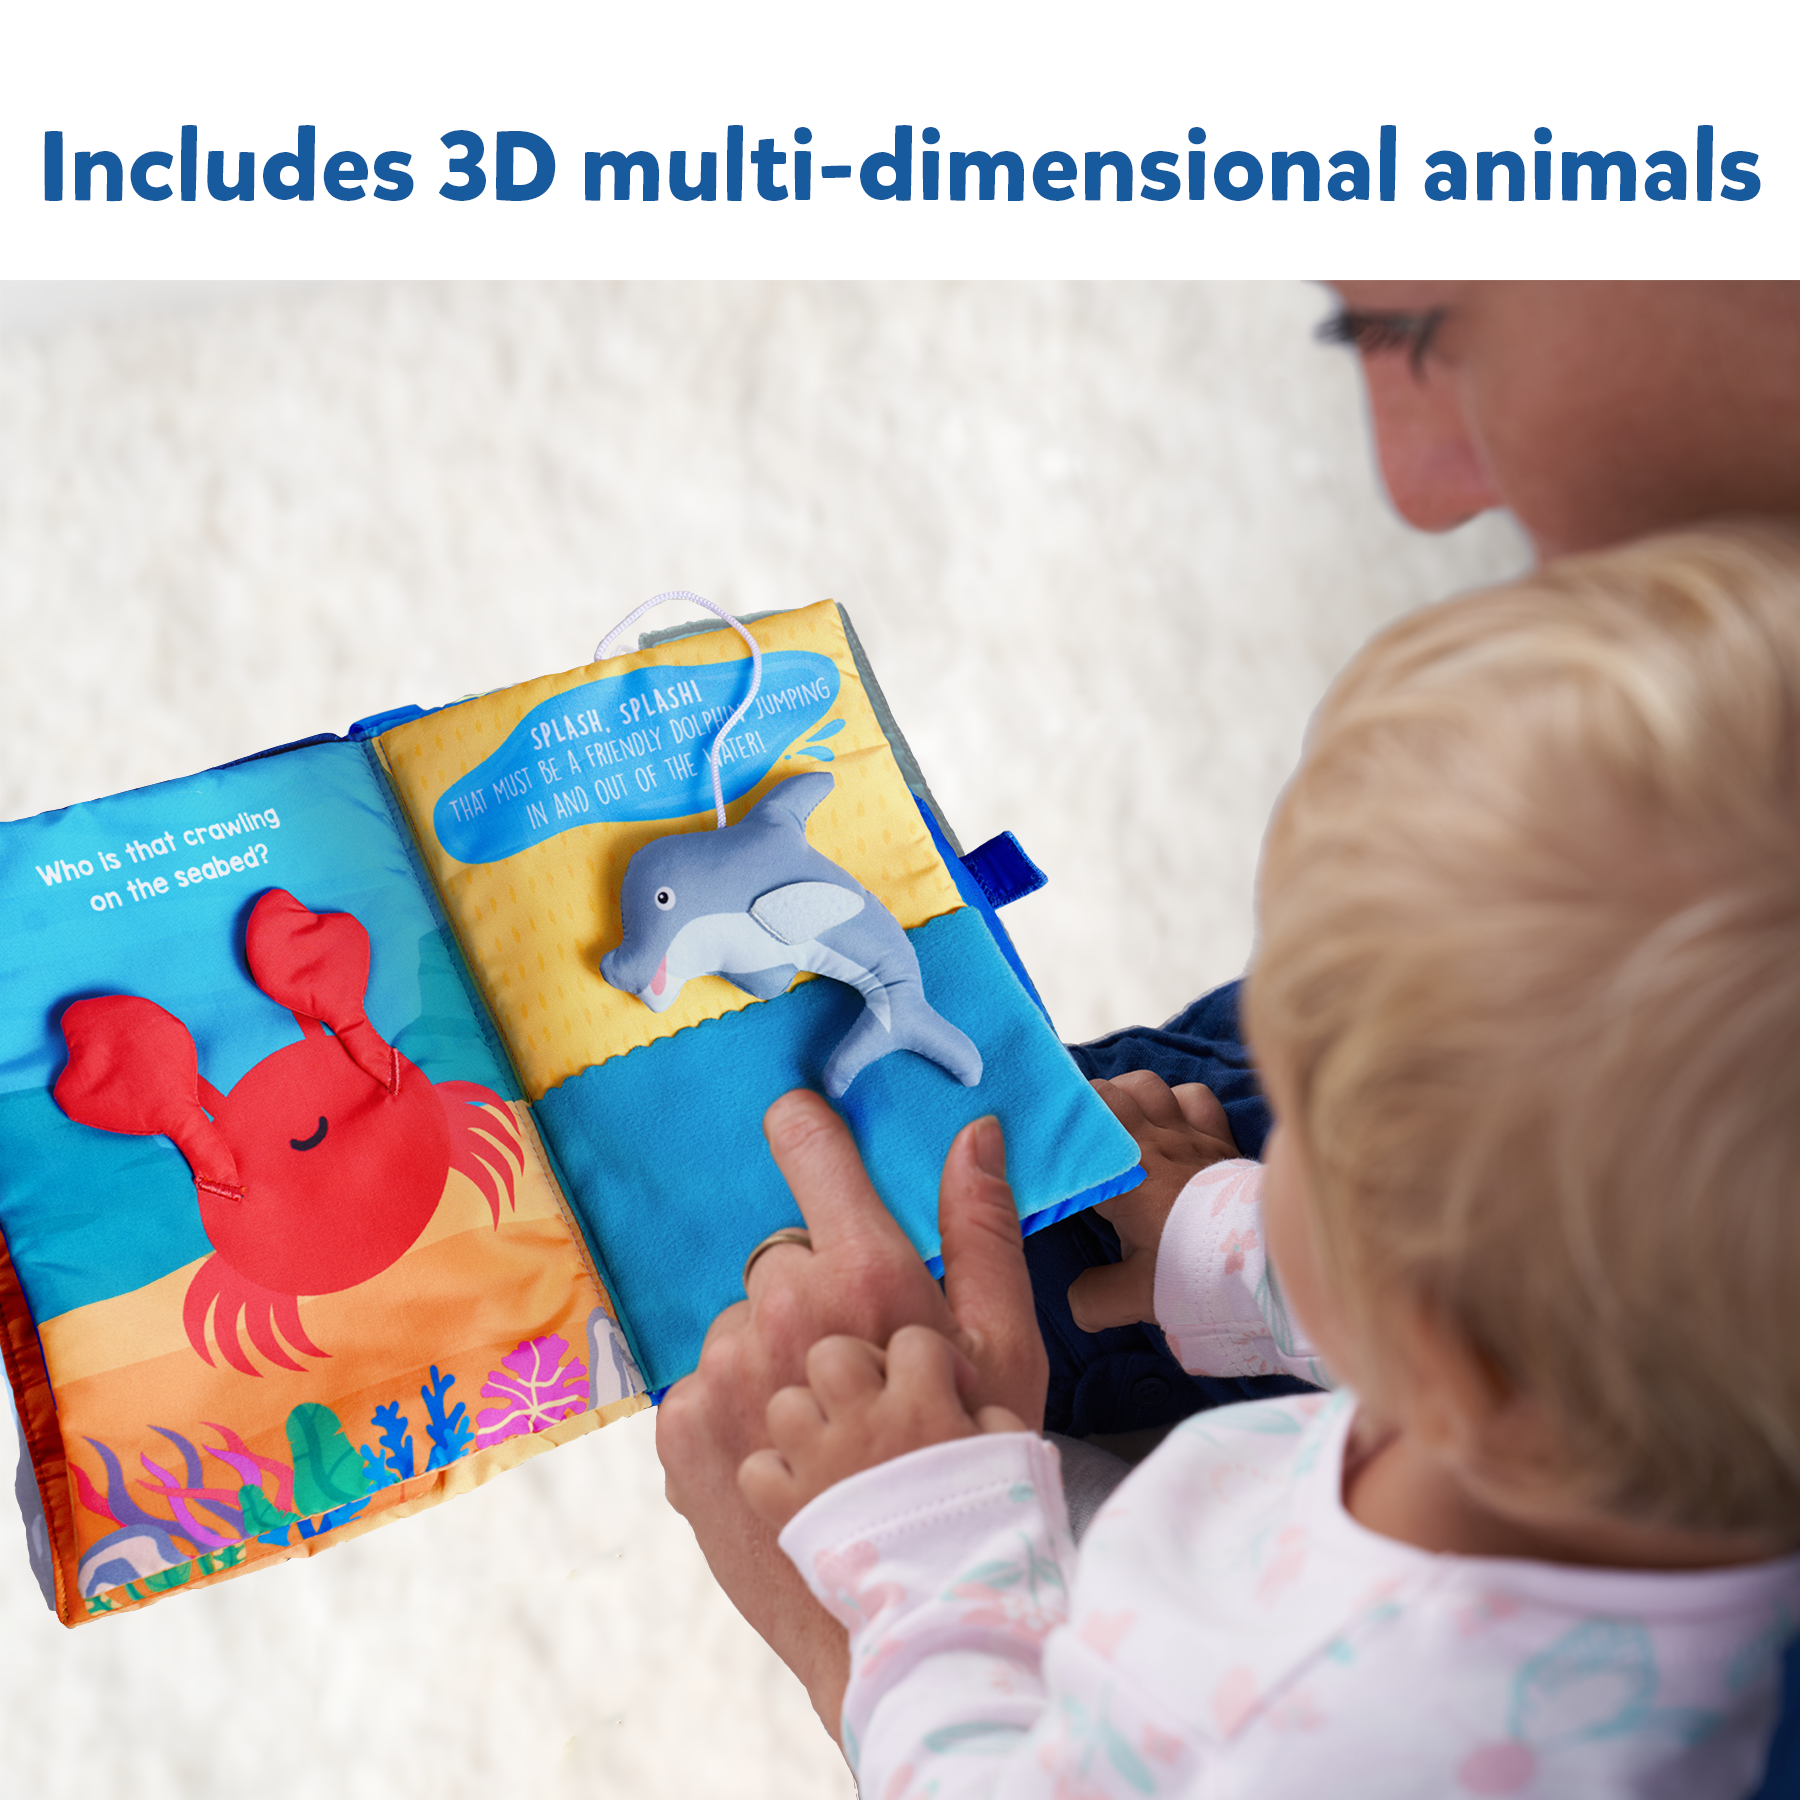 Skillmatics Baby Book - Peek-A-Boo I See You Underwater Animal Theme, Interactive Soft Cloth Book With Crinkle Pages, Ages 6 Months And Up